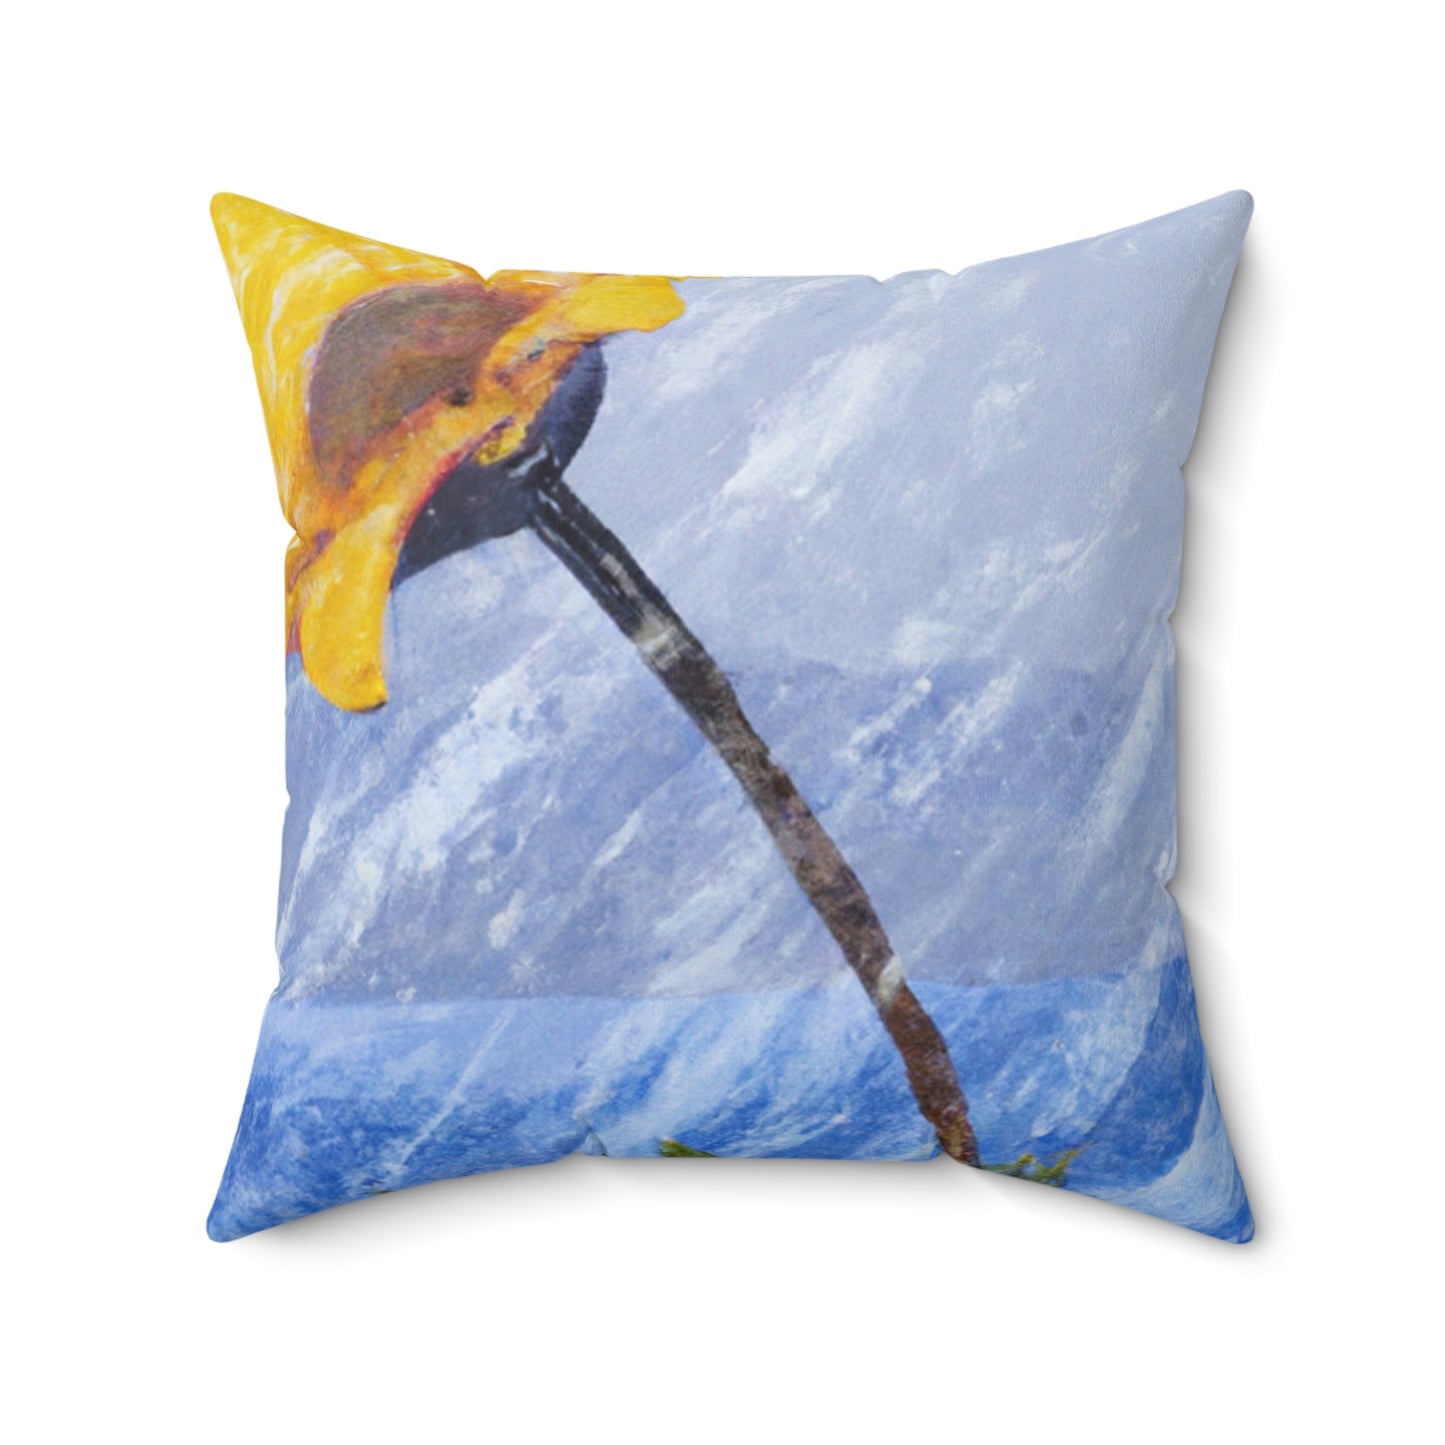 "A Burst of Color in the Glistening White: The Miracle of a Flower Blooms in a Snowstorm" - The Alien Square Pillow